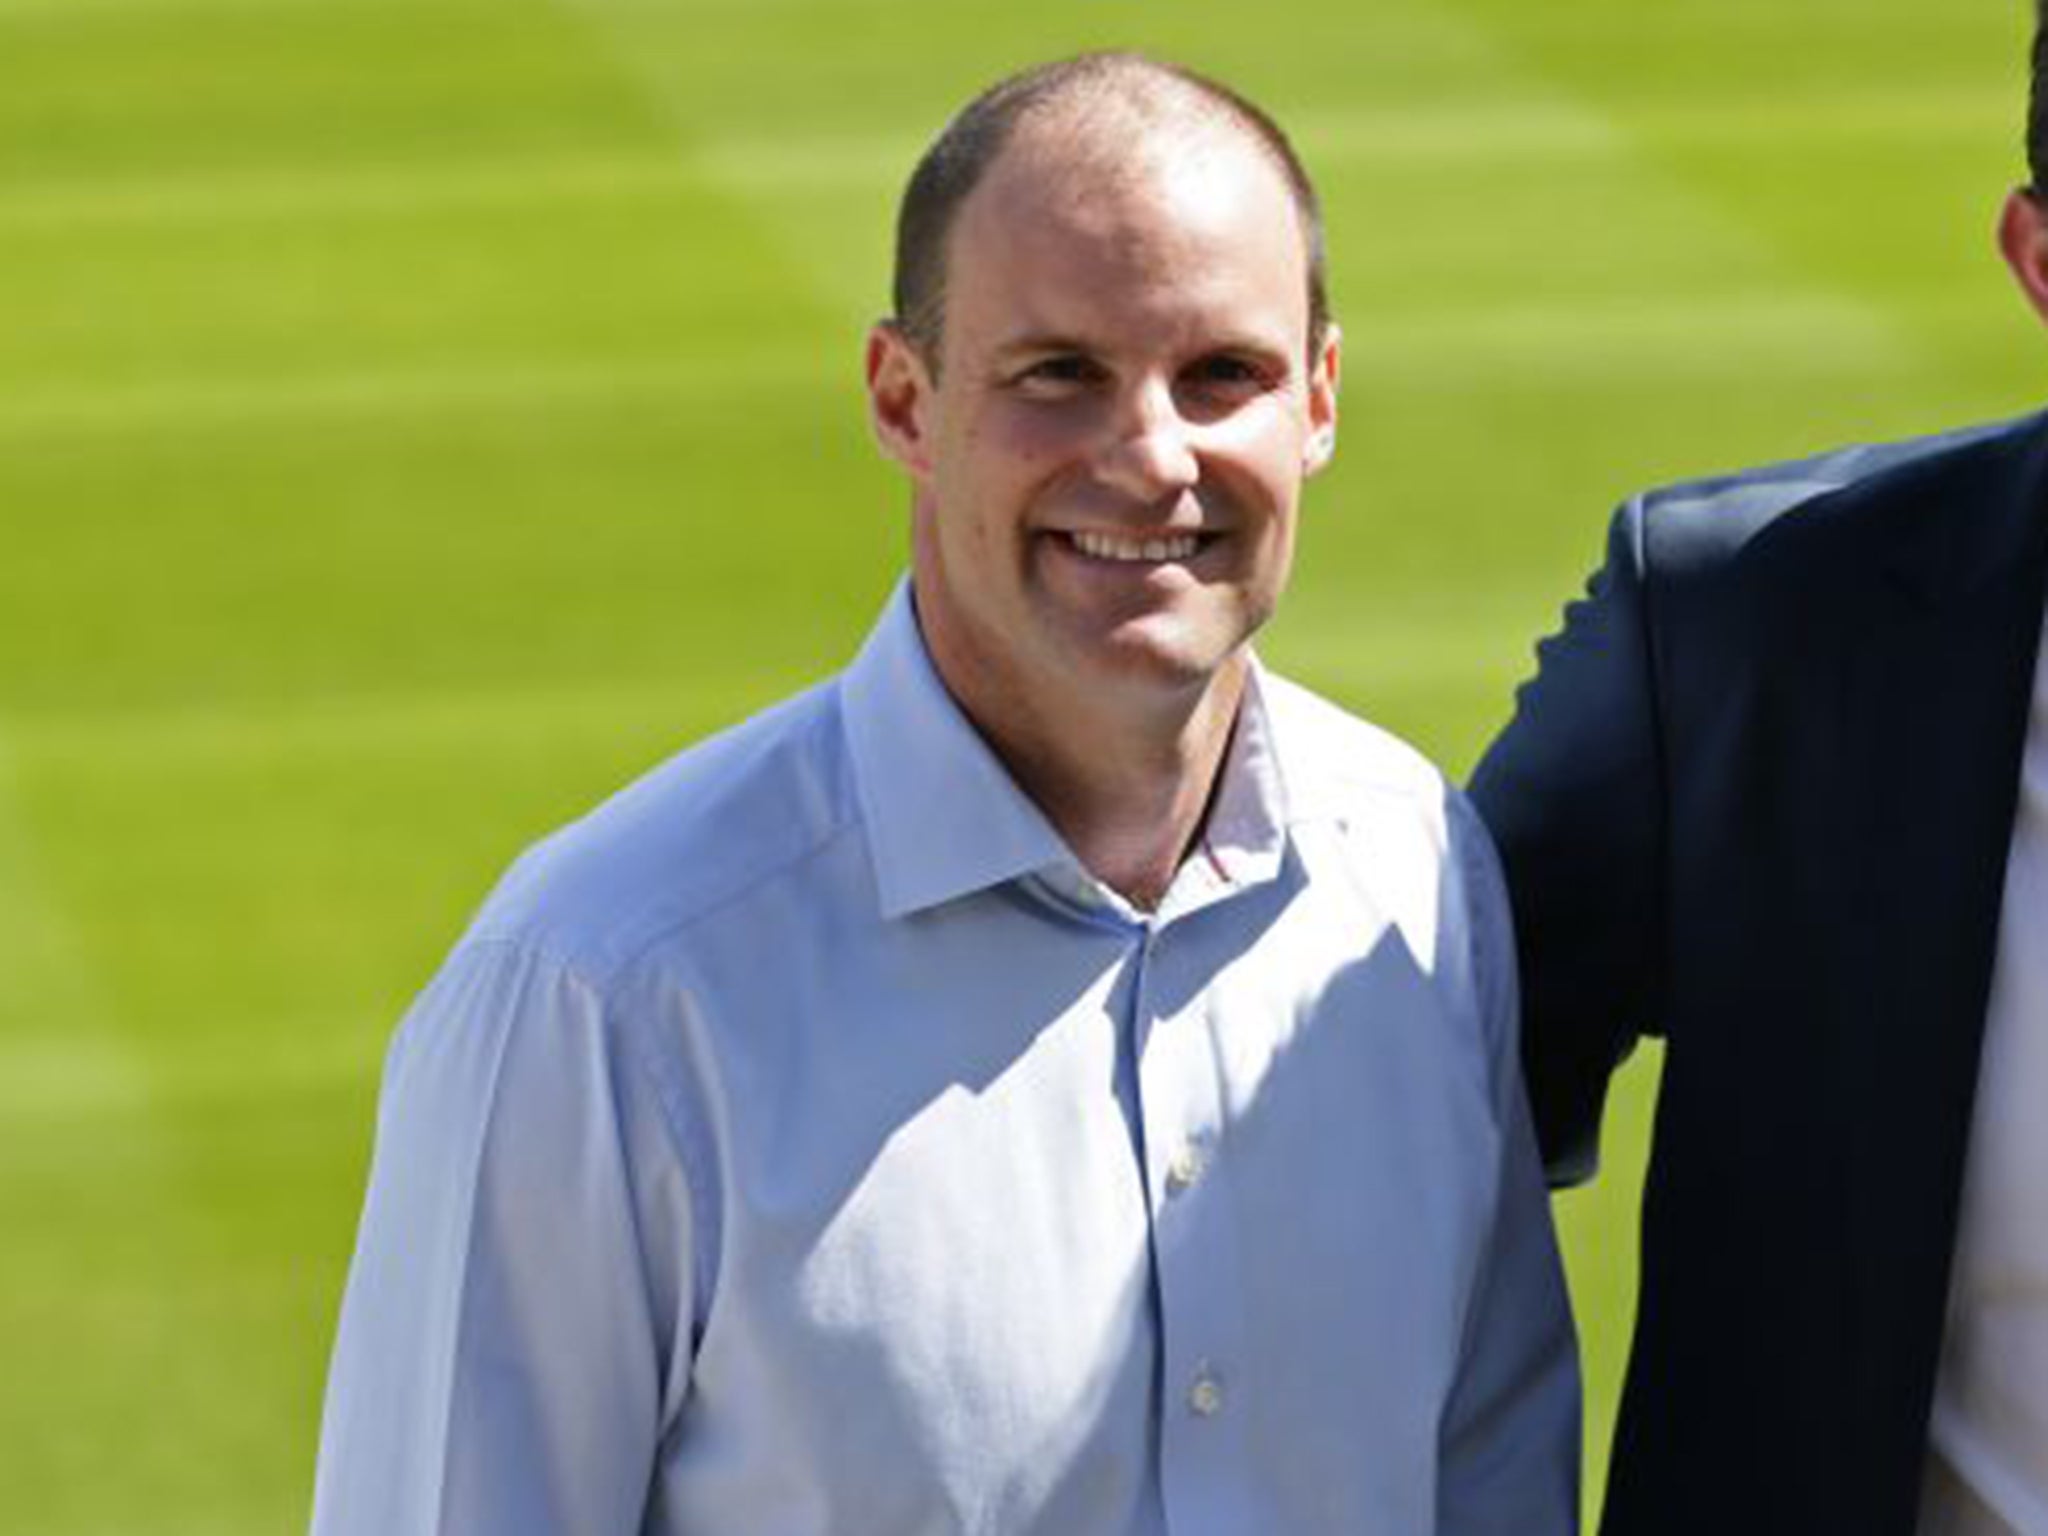 Andrew Strauss will come out of retirement to lead a side in a fund-raising Twenty20 game